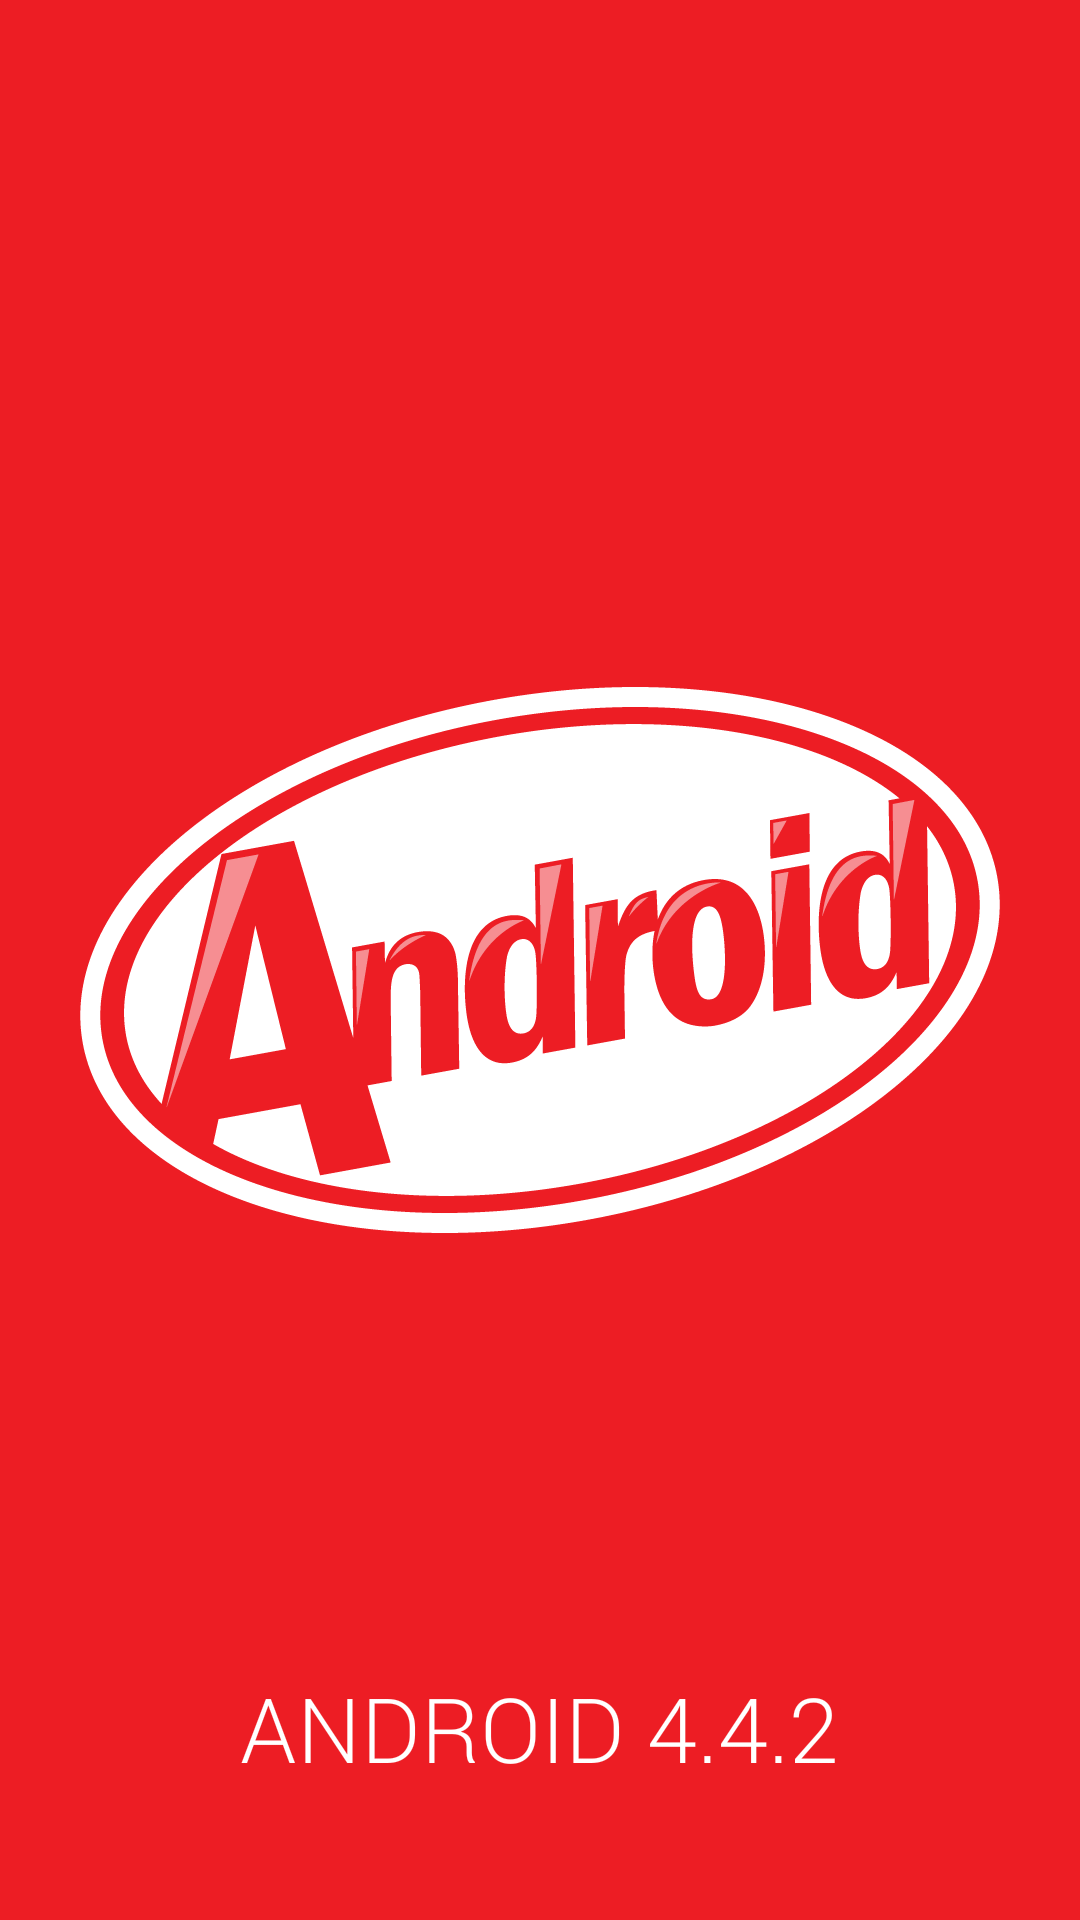 Galaxy S4 I9505 Exclusive Android 4.4.2 KitKat Firmware: I9505XXUFNA5